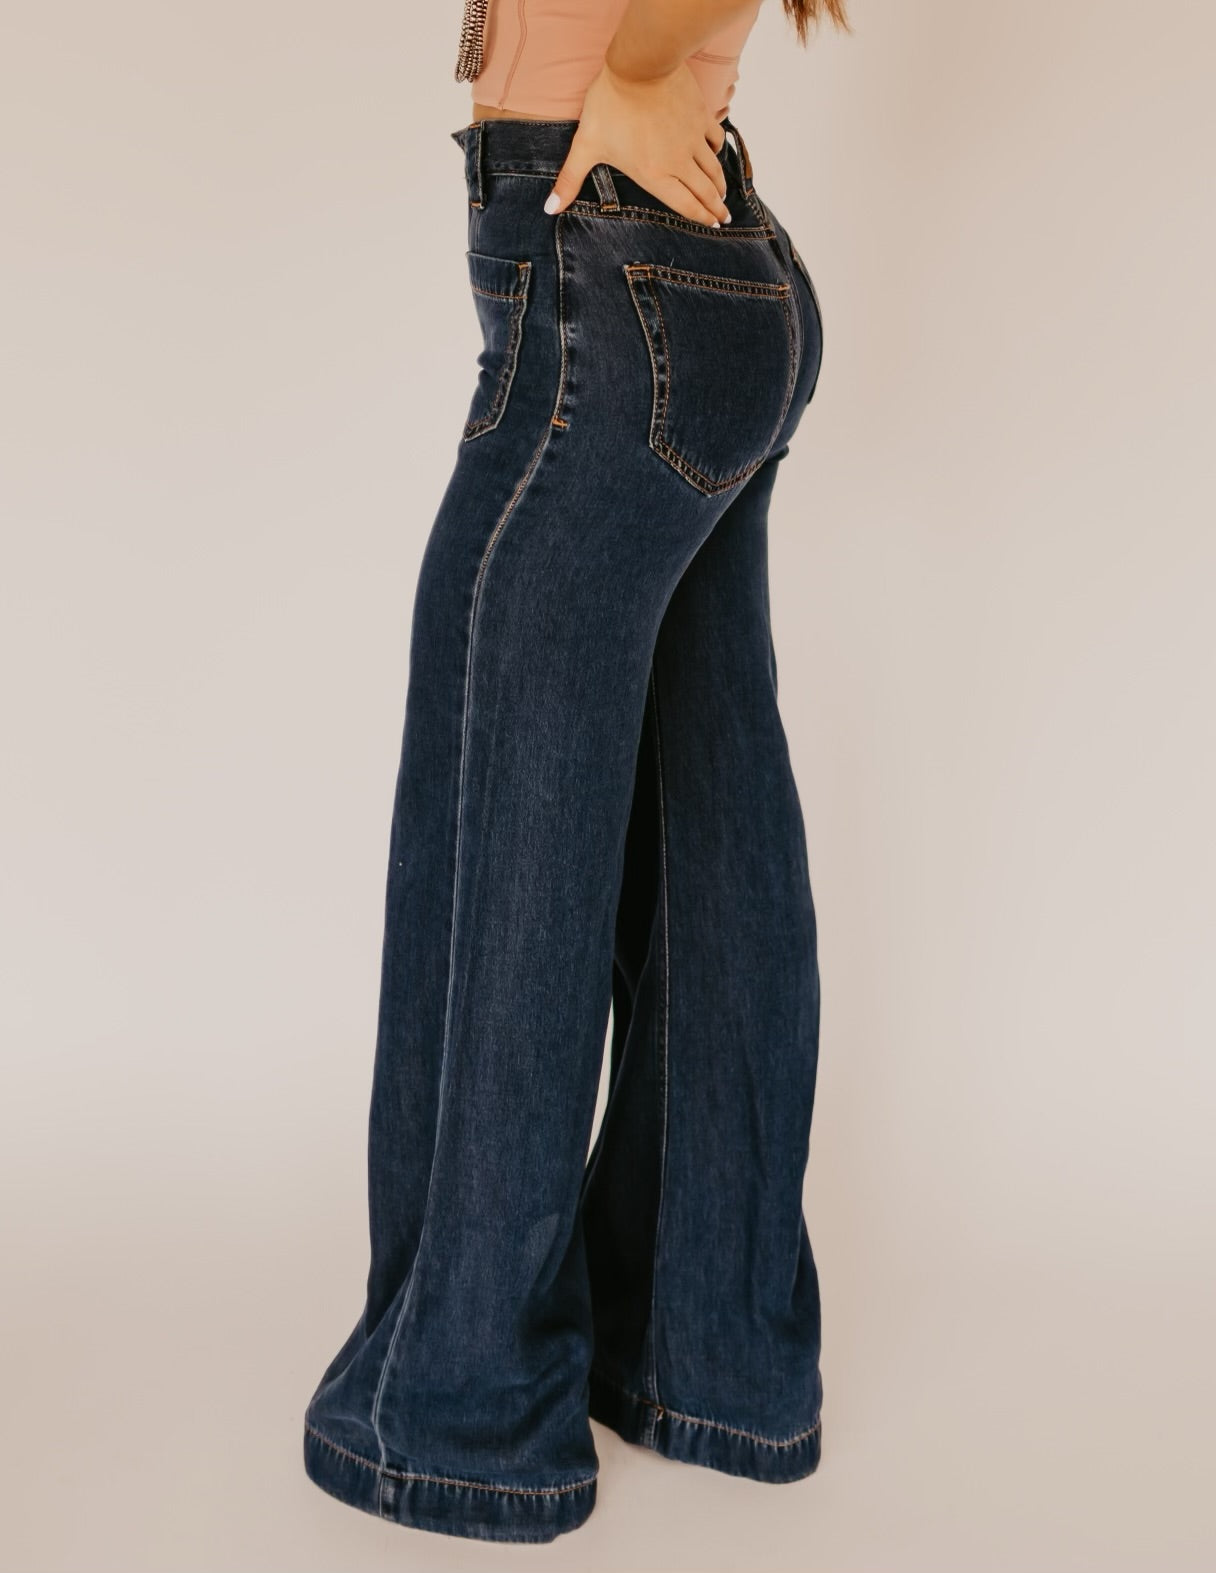 The Whisper Trouser by ARIAT